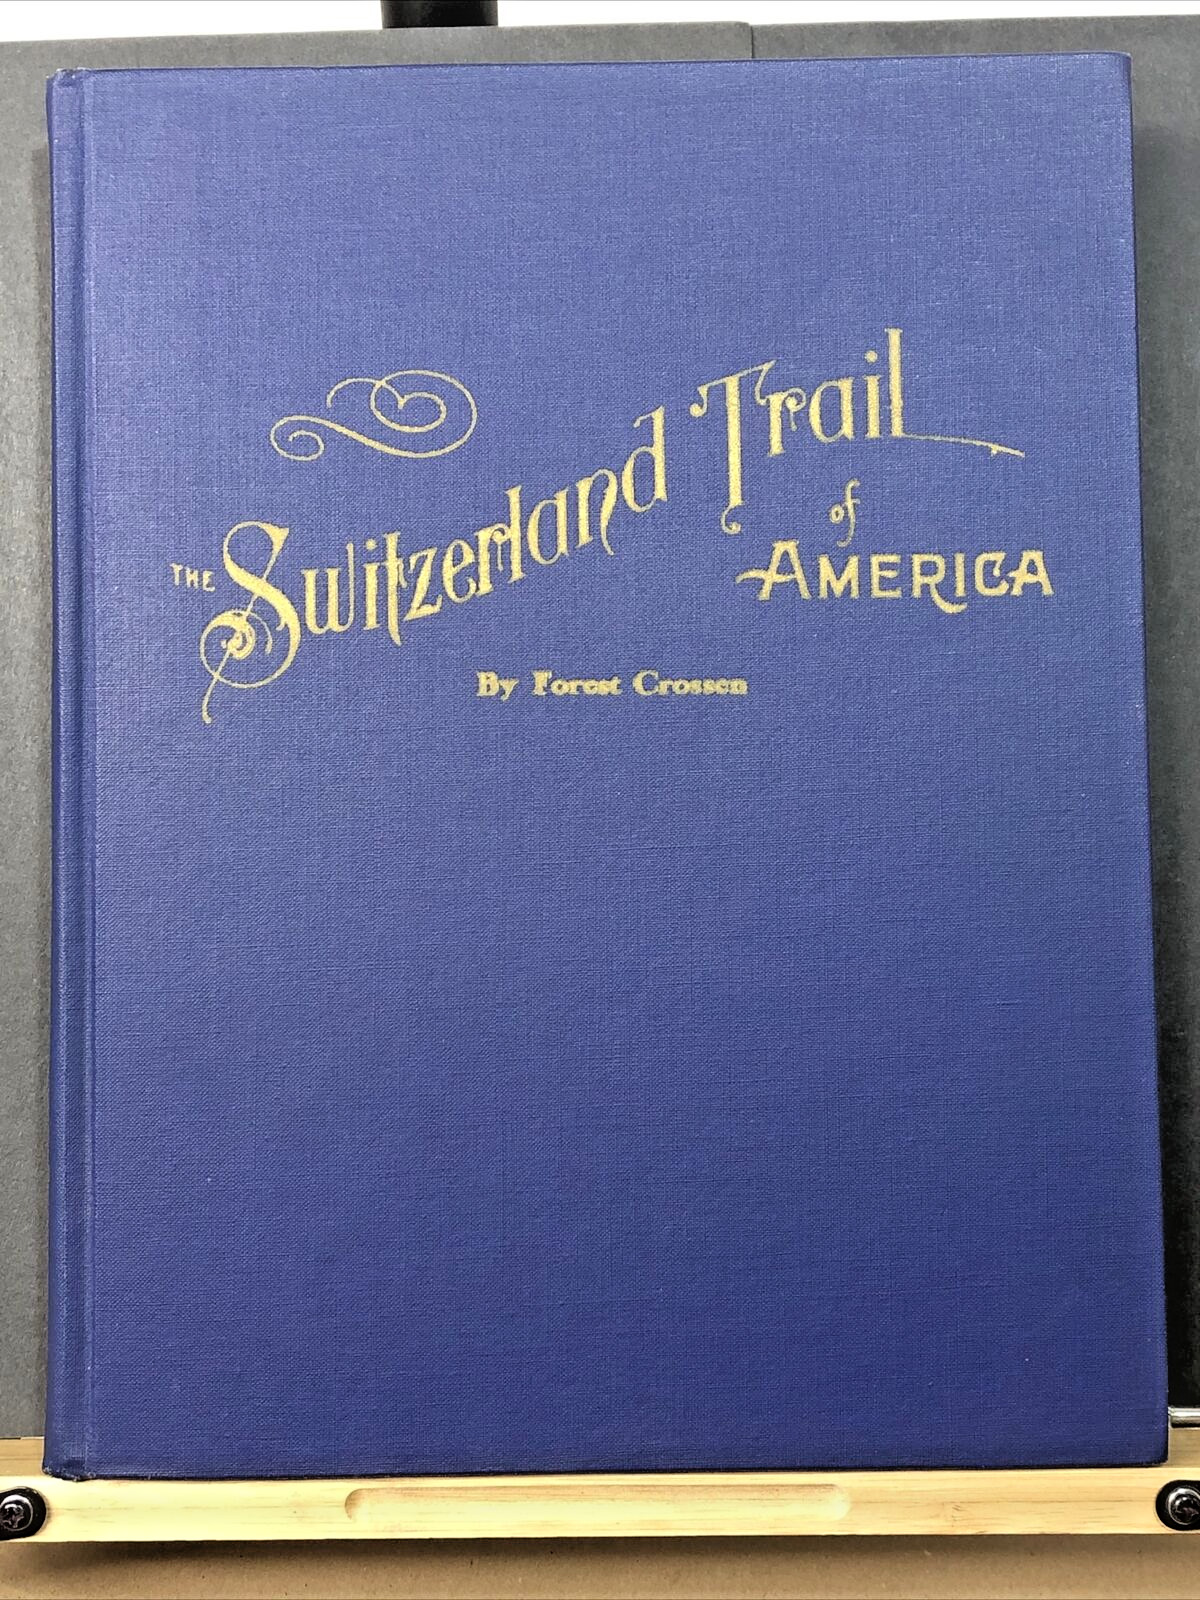 The Switzerland Trail of America by Forest Crossen, 1962, Signed & Numbered